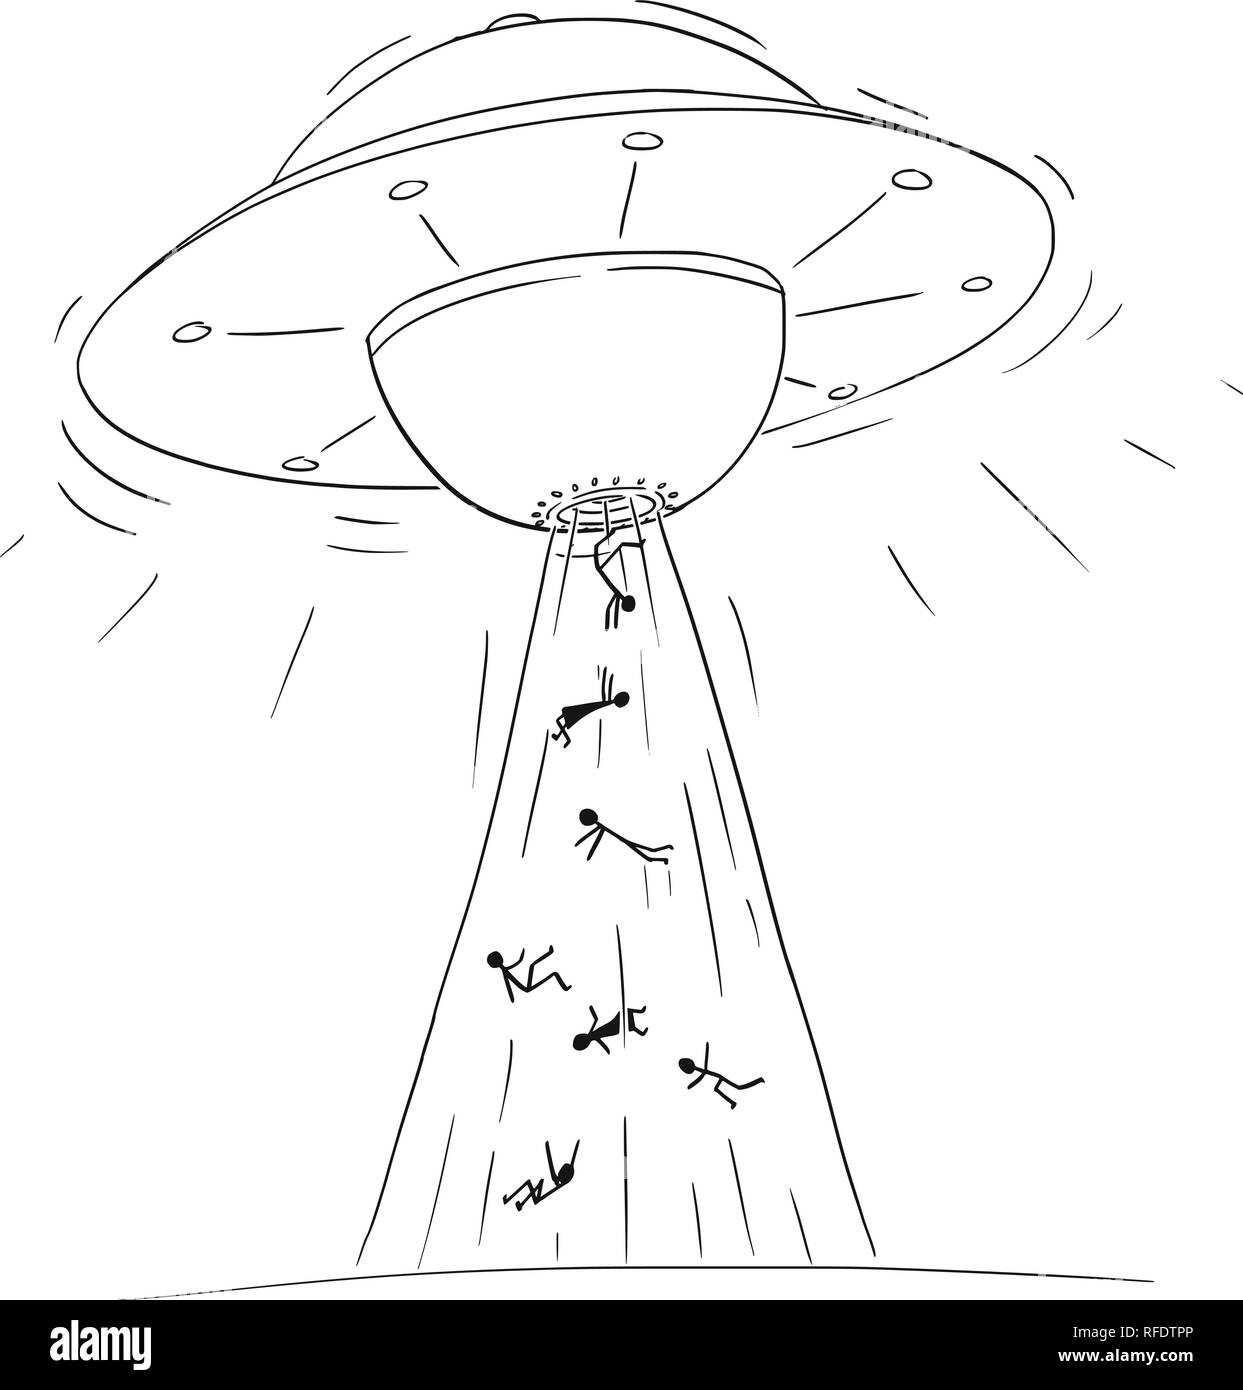 Cartoon Drawing Of Alien Space Ship Or Ufo Abducting People In Ray Of Light Stock Vector Image Art Alamy